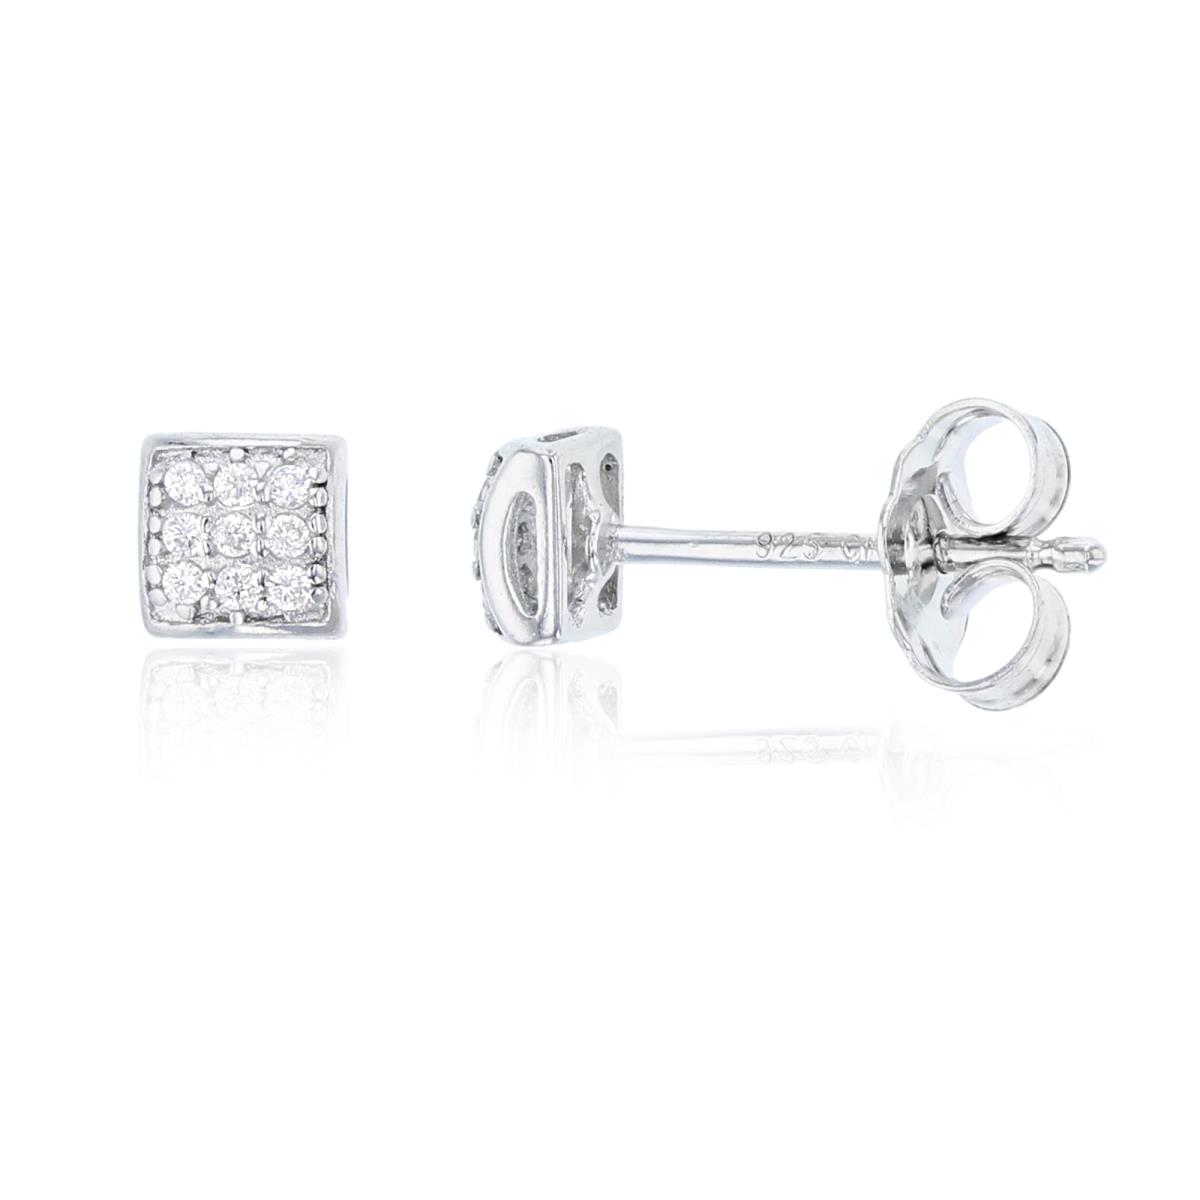 Sterling Silver 5mm Micropave Domed Square Stud Earring